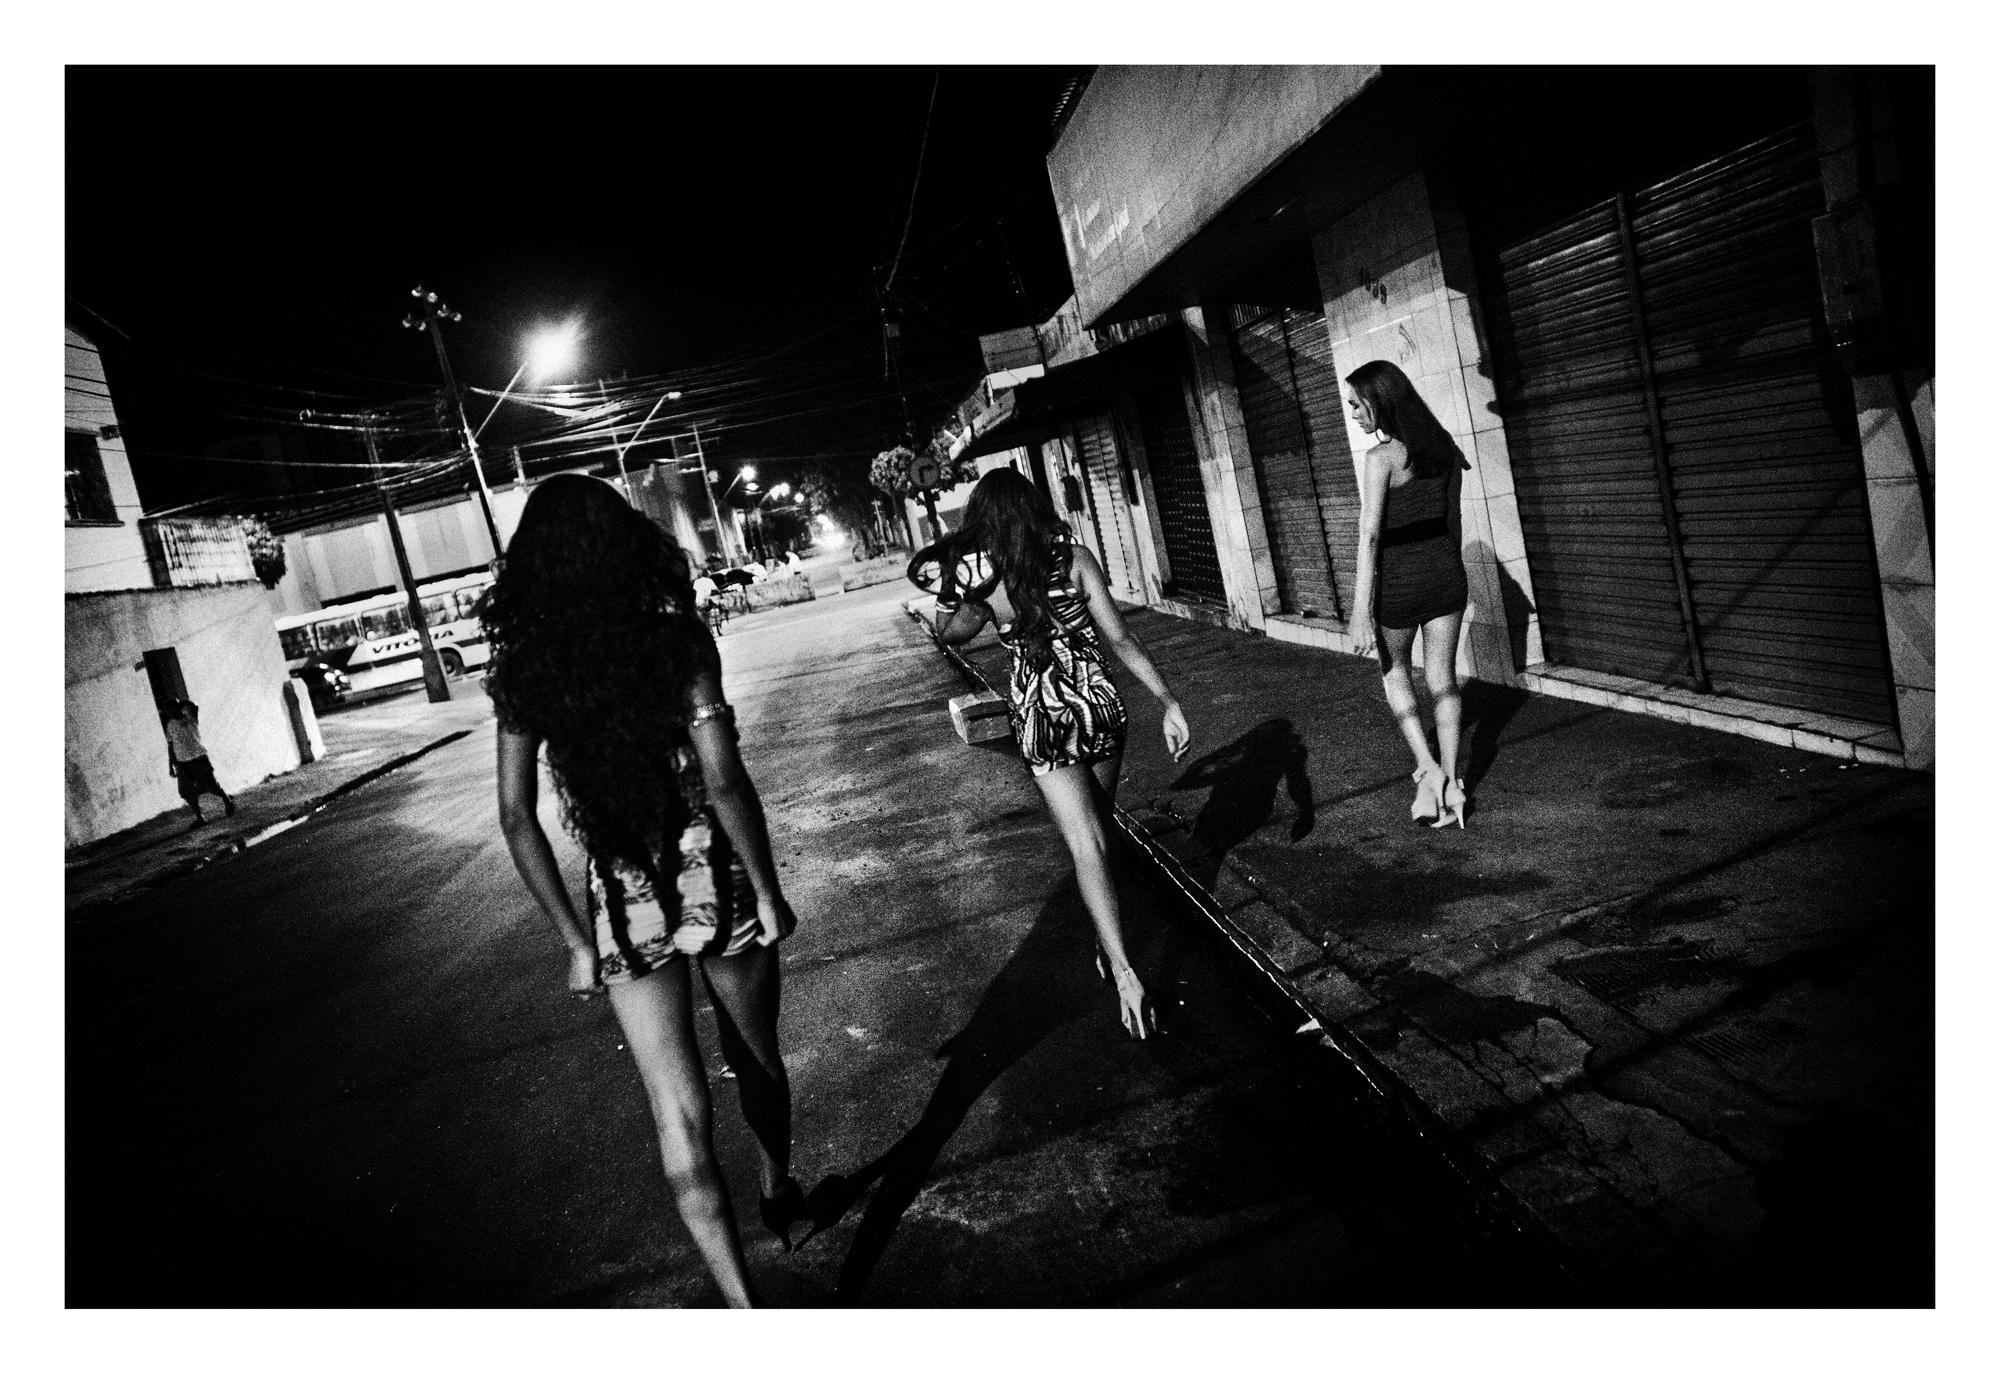 All imperfect things - Fortaleza, Brazil.
April 2012.
Bianca, Robson and some...